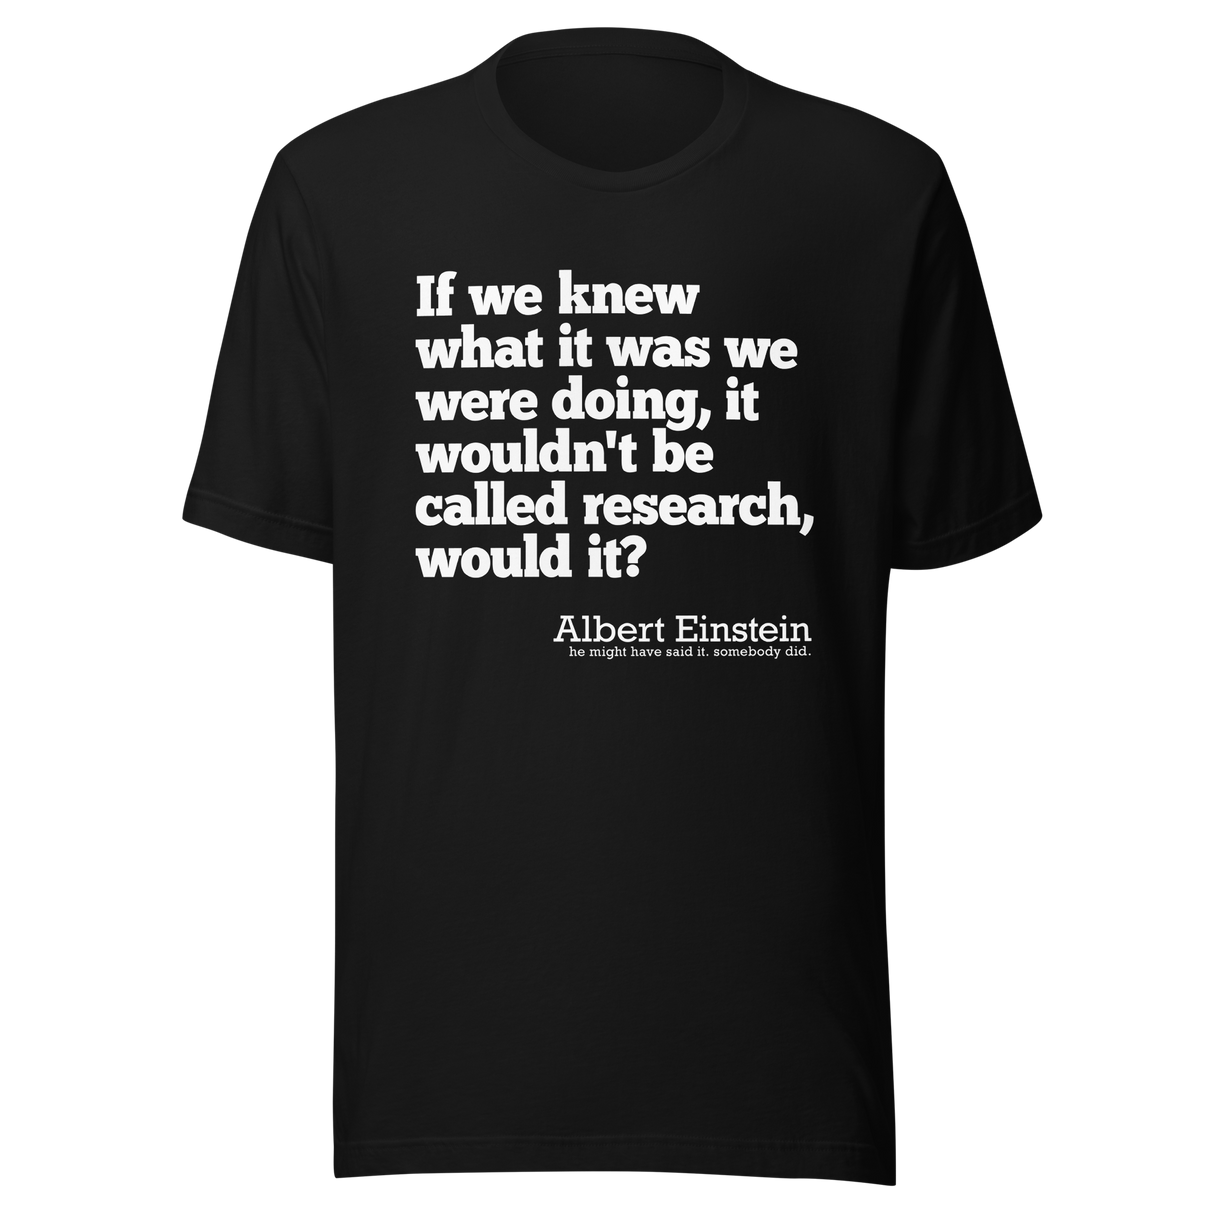 if-we-knew-what-it-was-we-were-doing-it-would-not-be-called-research-would-it-albert-einstein-knew-tee-doing-t-shirt-research-tee-t-shirt-tee#color_black